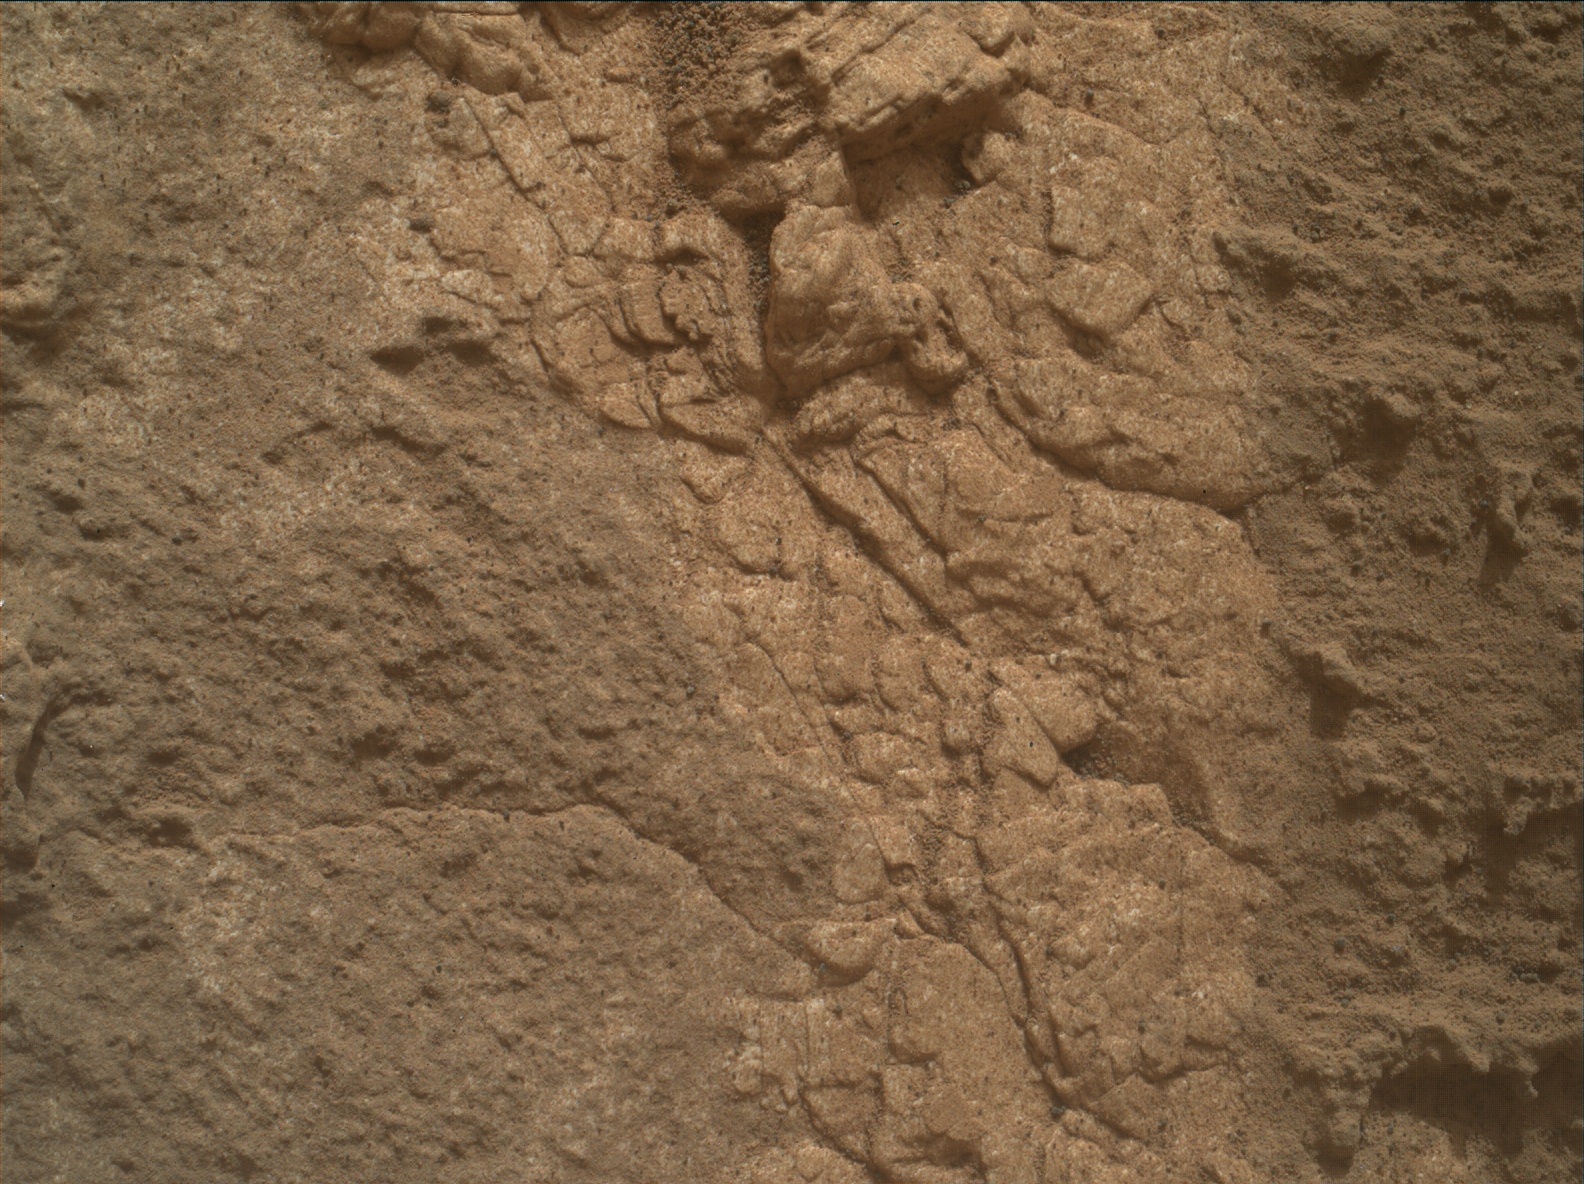 Nasa's Mars rover Curiosity acquired this image using its Mars Hand Lens Imager (MAHLI) on Sol 3461